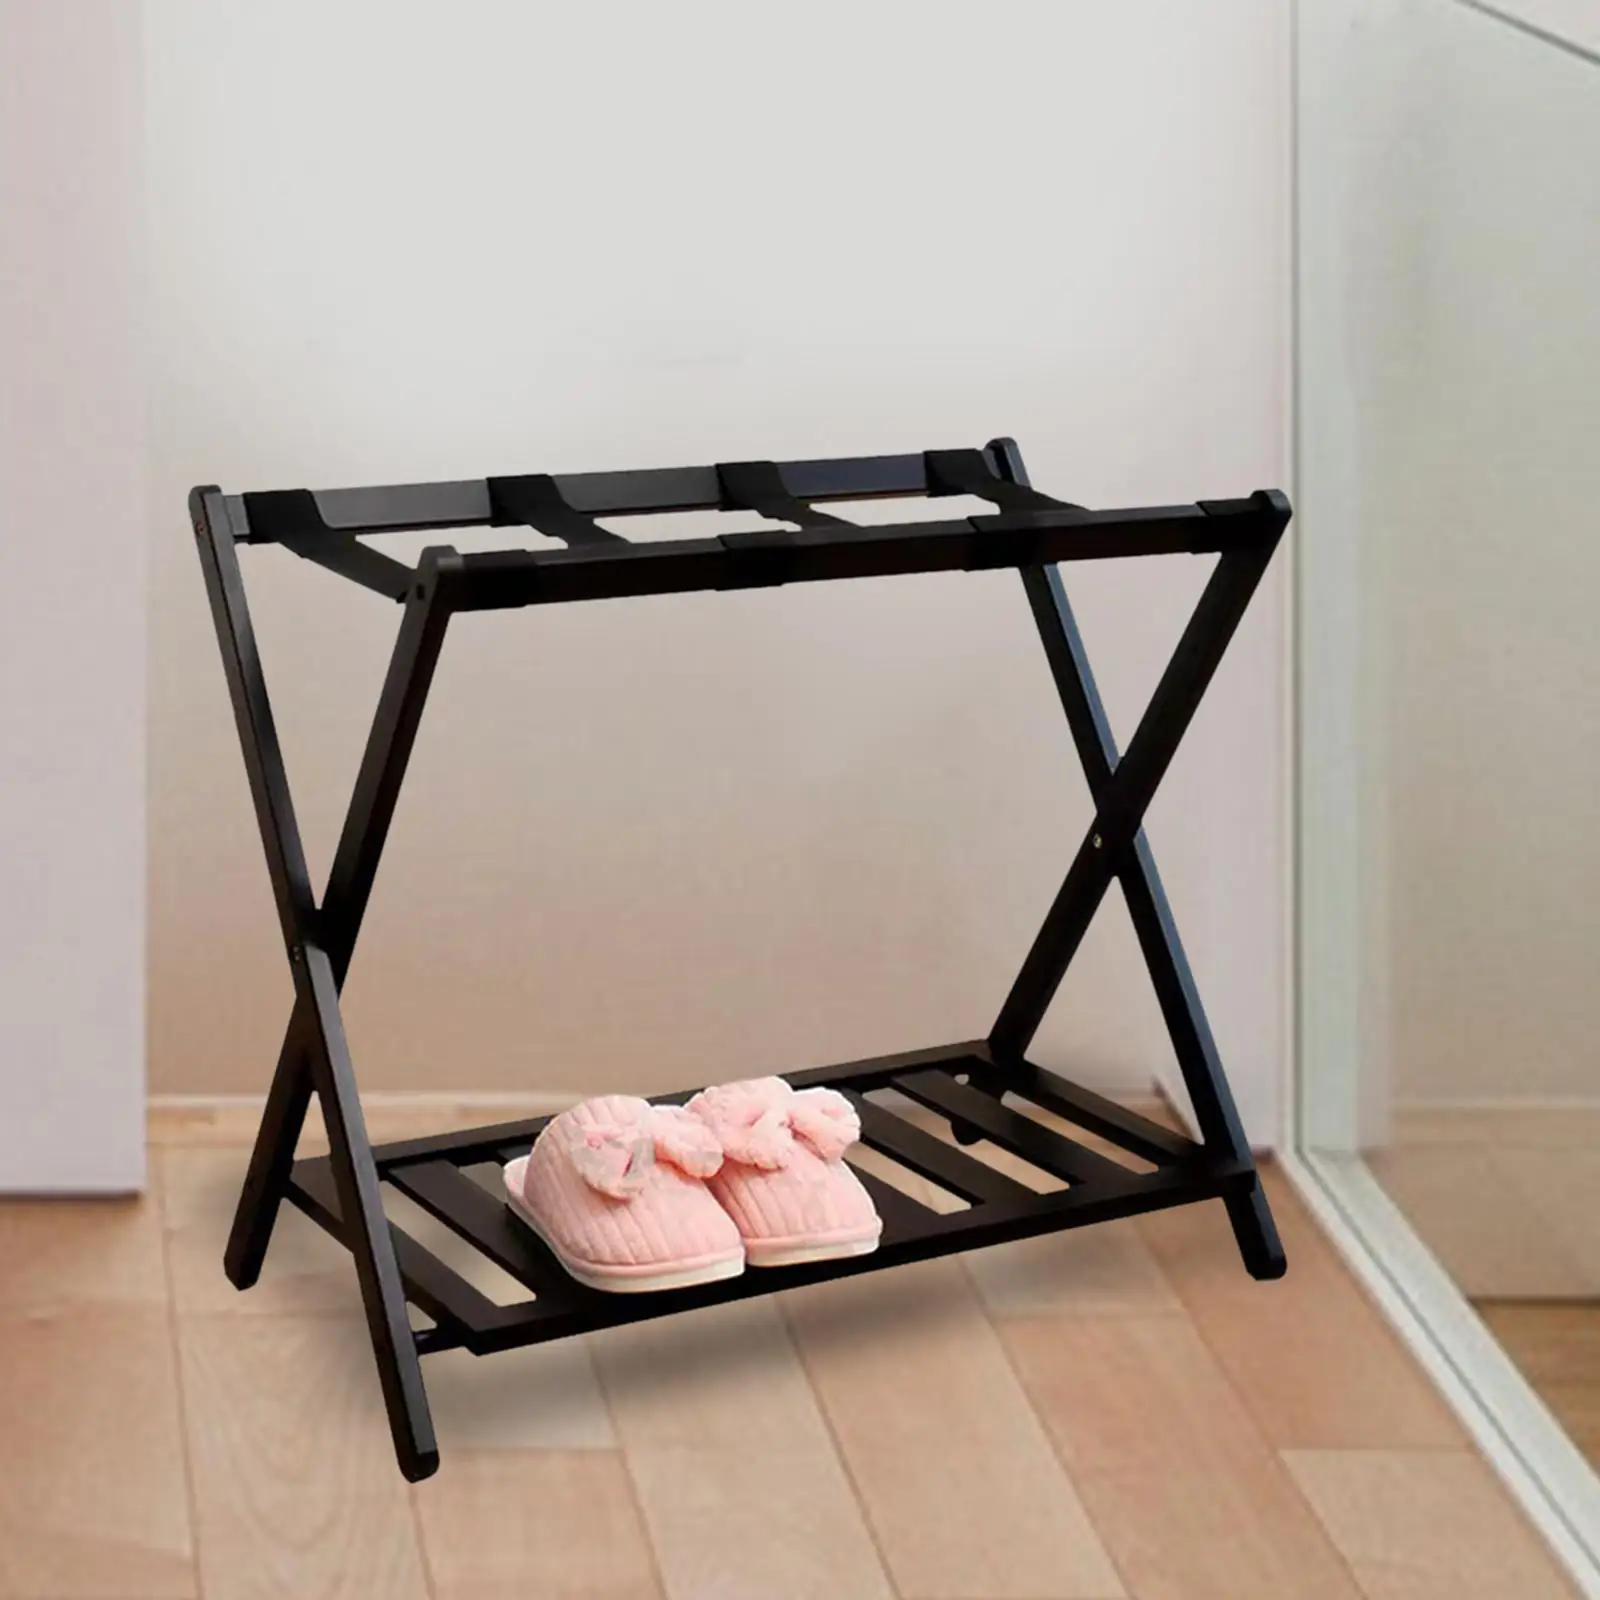 Folding Luggage Rack Casual with Shelf Folding Hotel Luggage Rack for Bedroom Guest Room